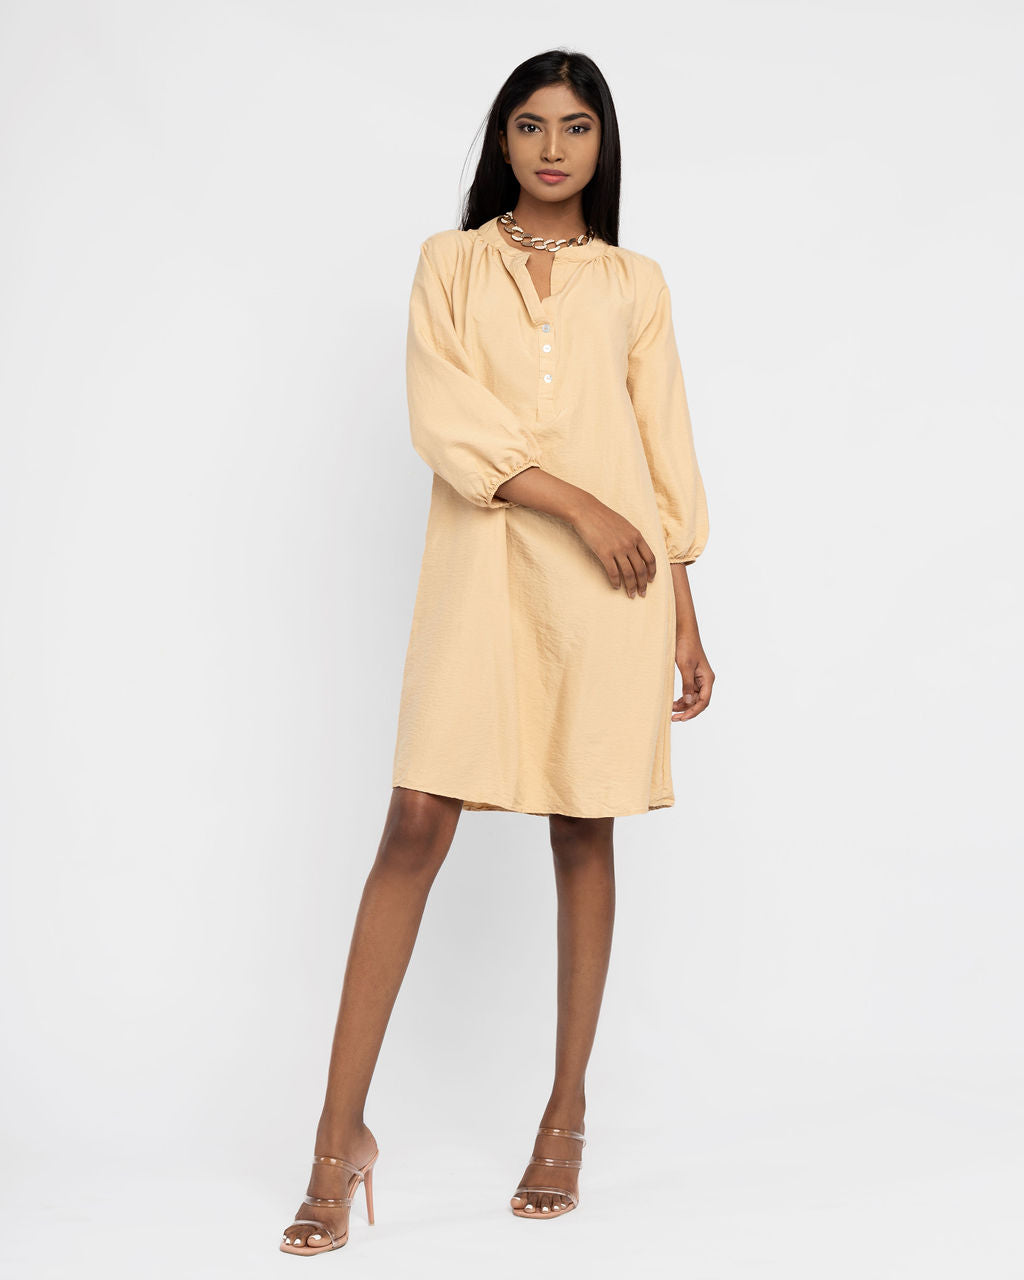 BEIGE CHINESE COLLOR DRESS